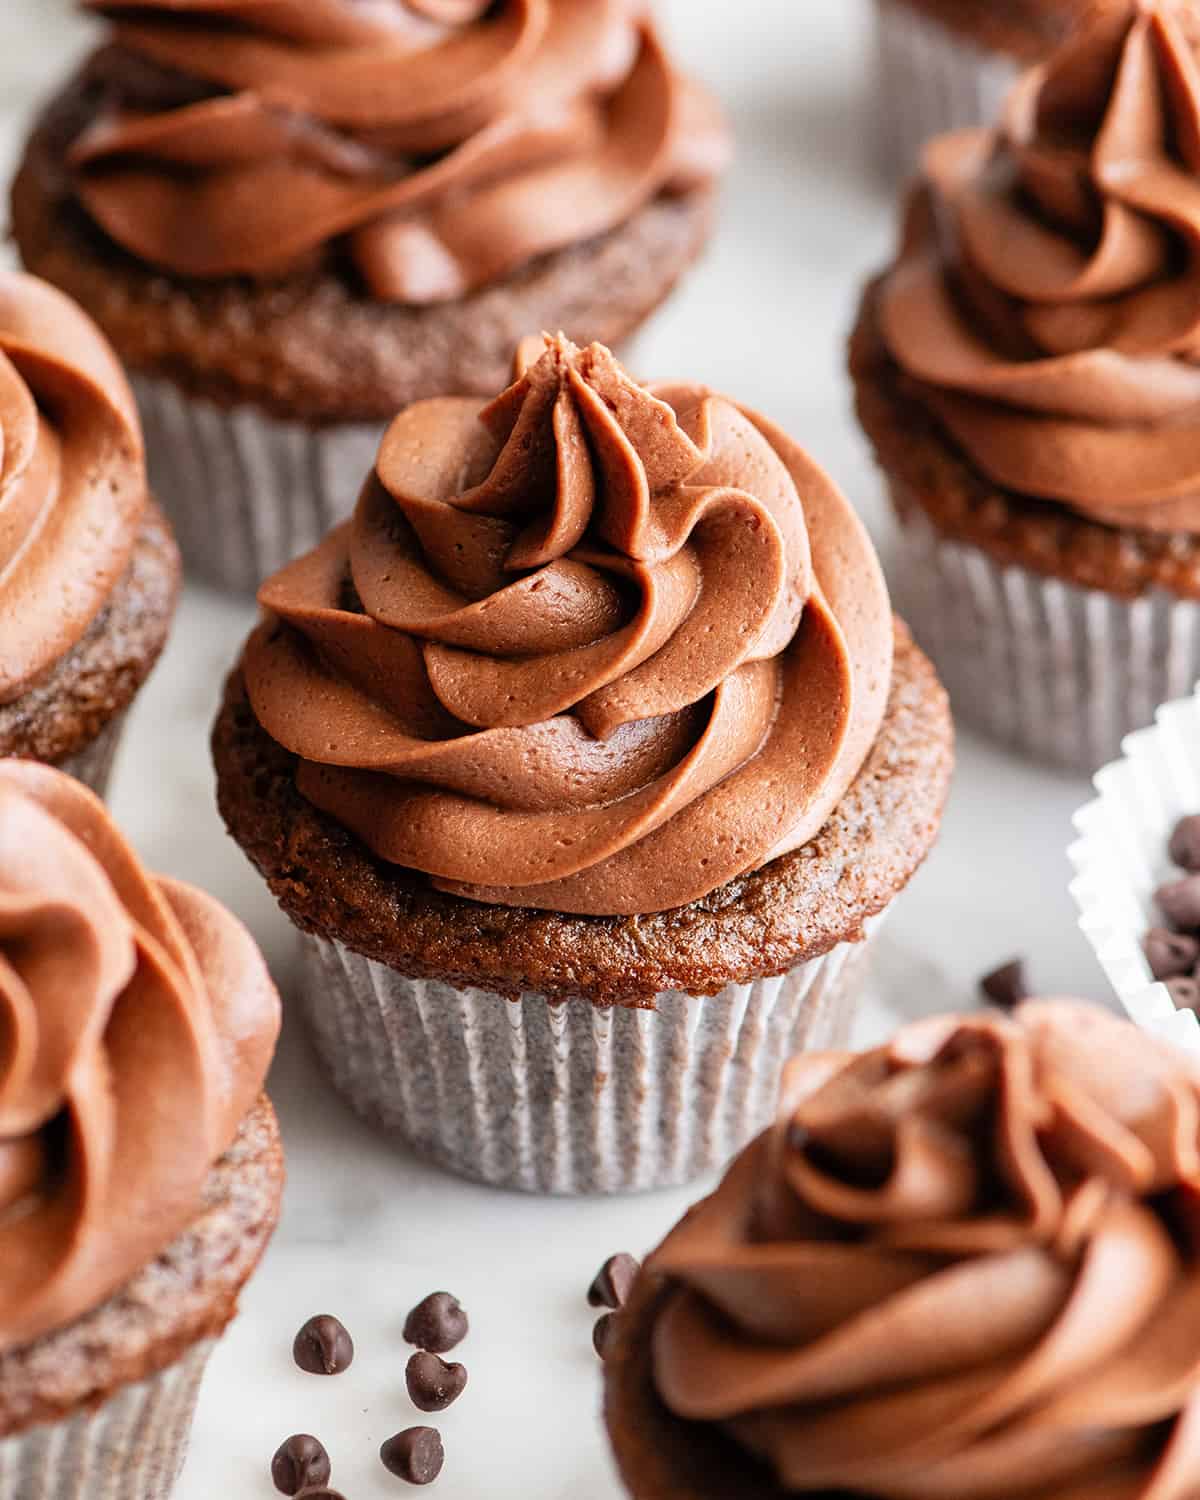 Chocolate Buttercream Frosting piped on top of 6 chocolate cupcakes